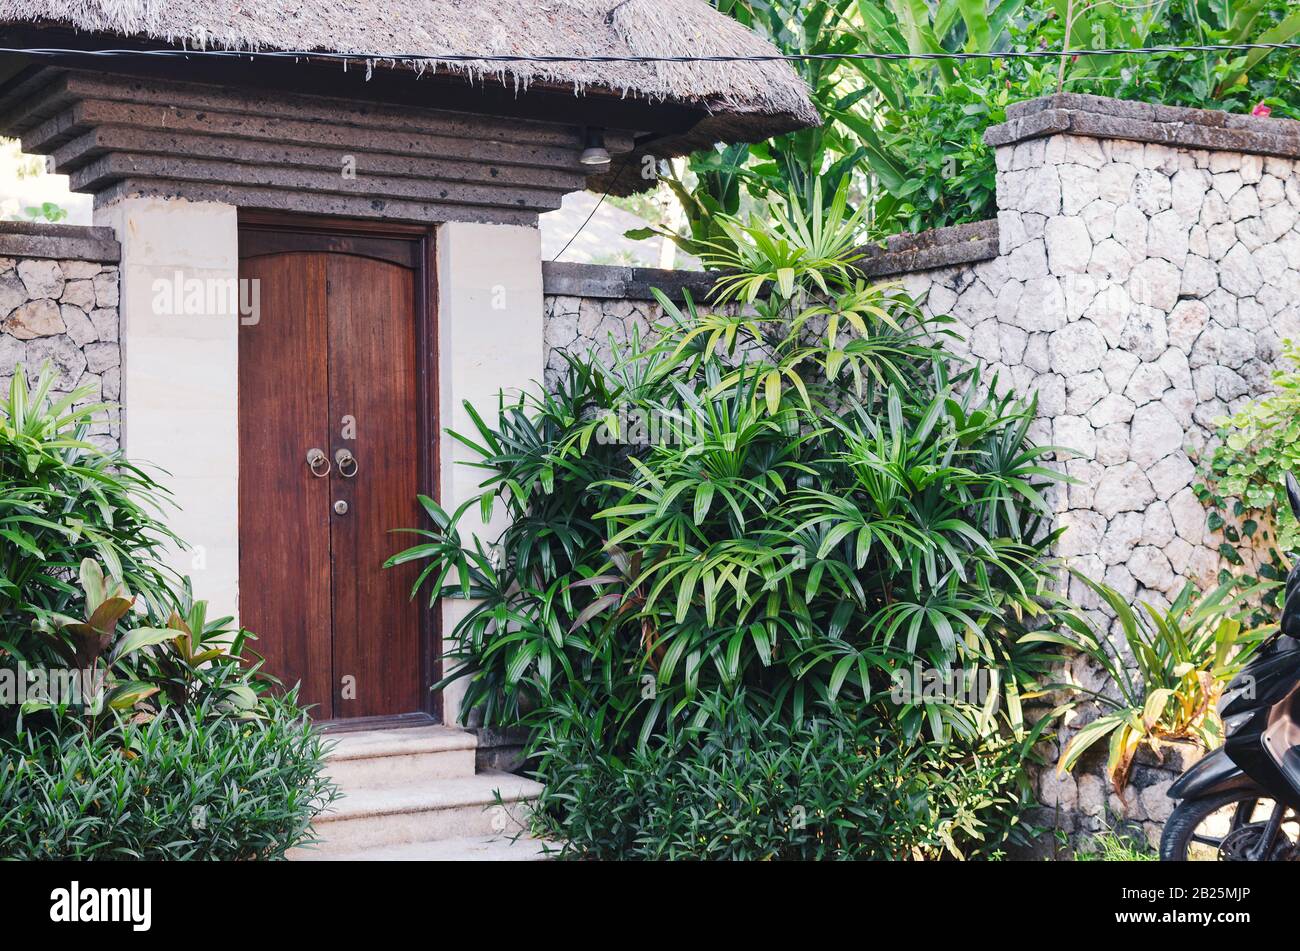 view of the front door in a stone fence surrounded by green plants.  Housing villa in the tropics. Bali, Indonesia Stock Photo